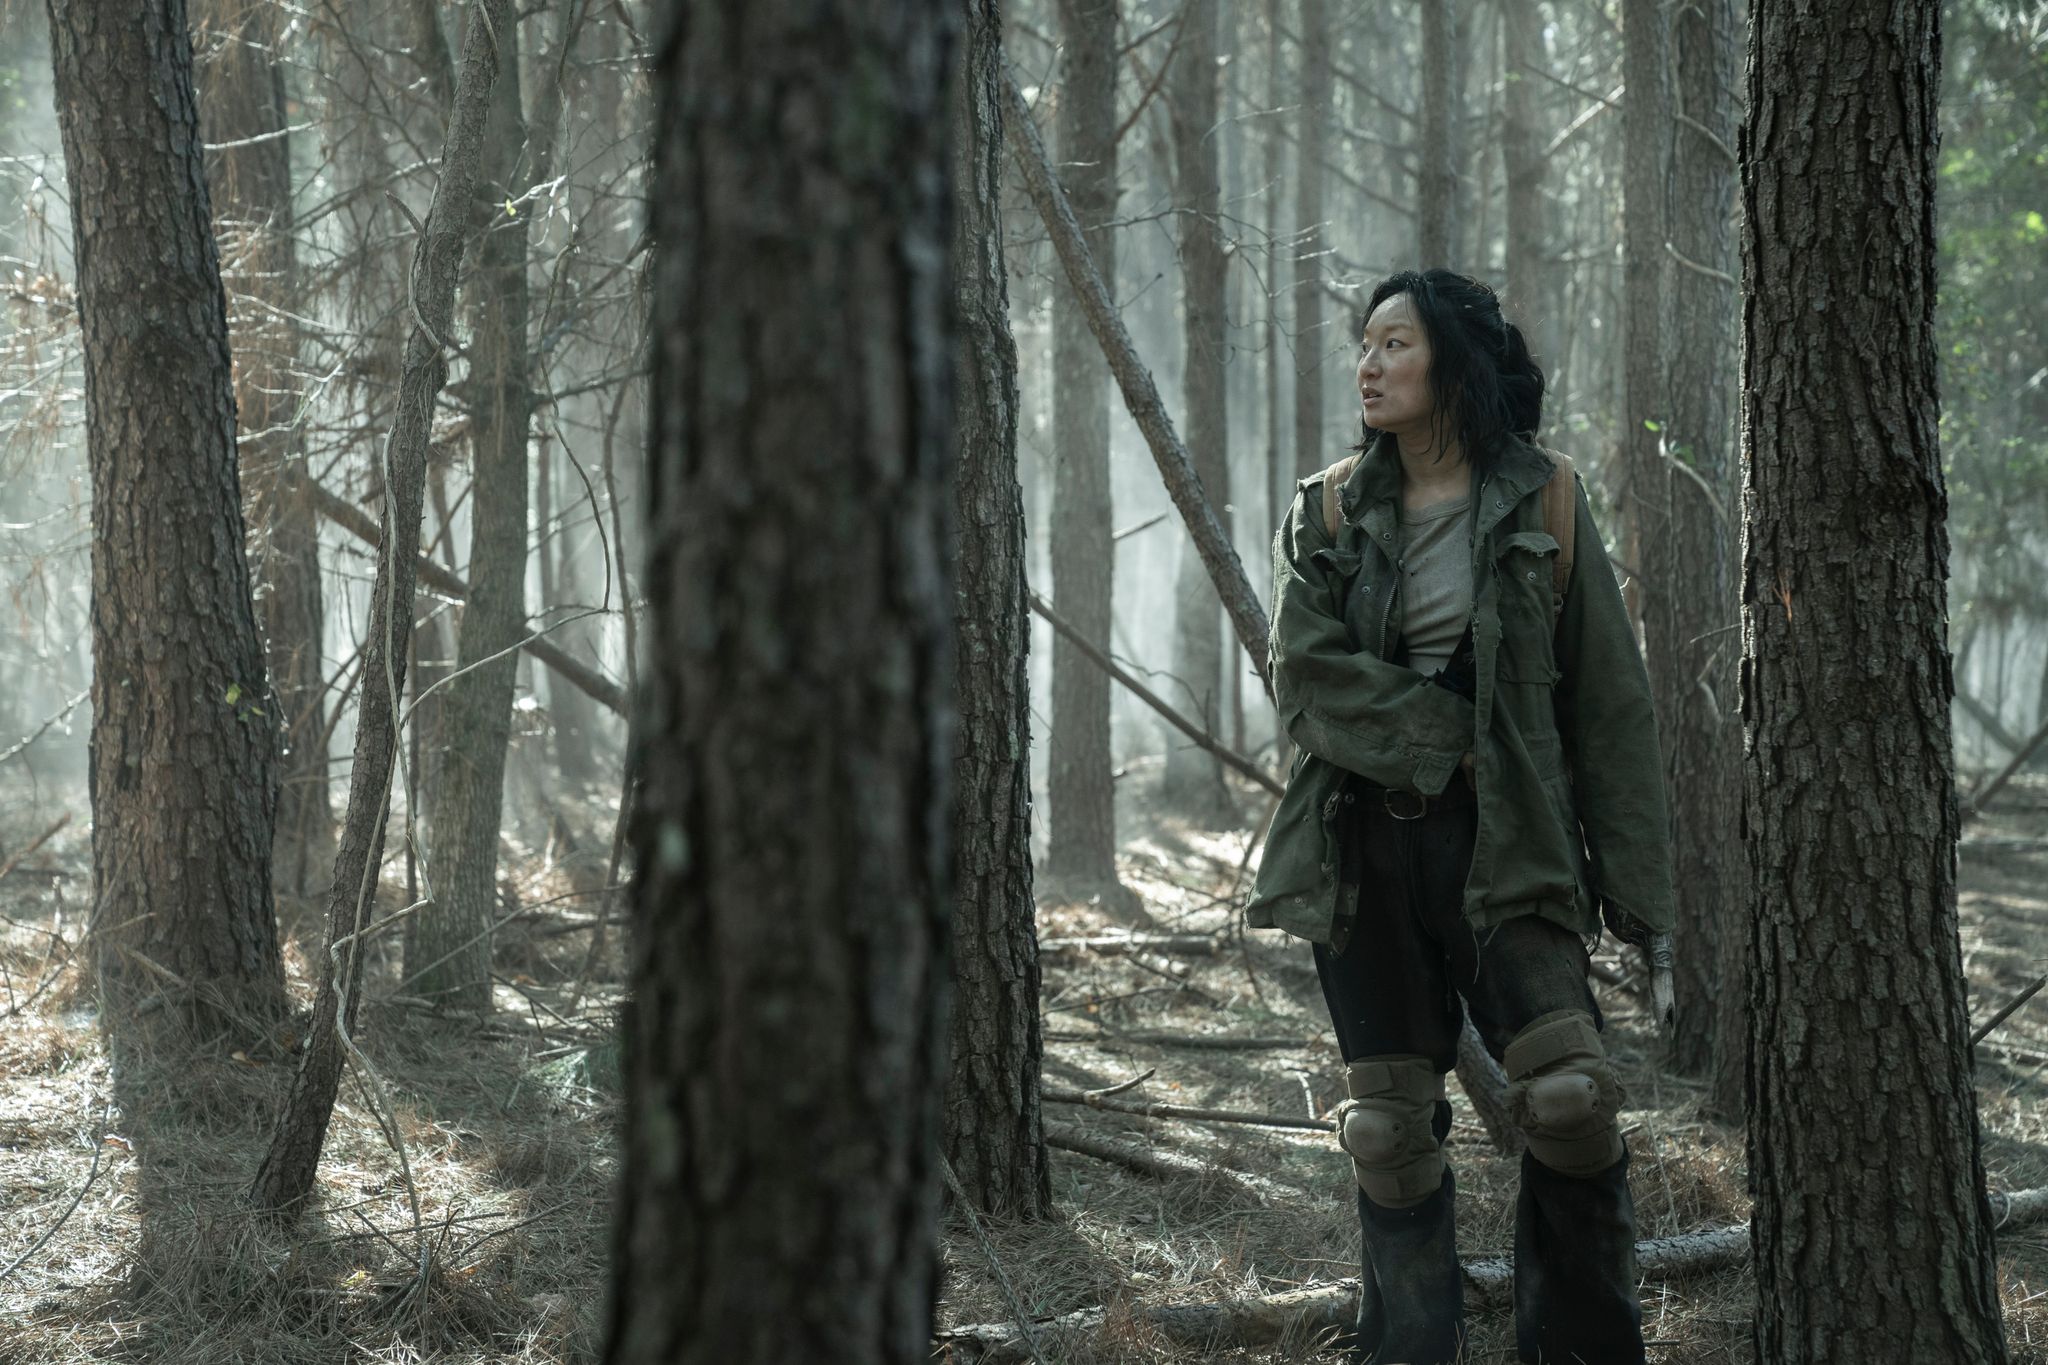 Poppy Liu in character as Amy in Tales of the Walking Dead in a snowy forest setting